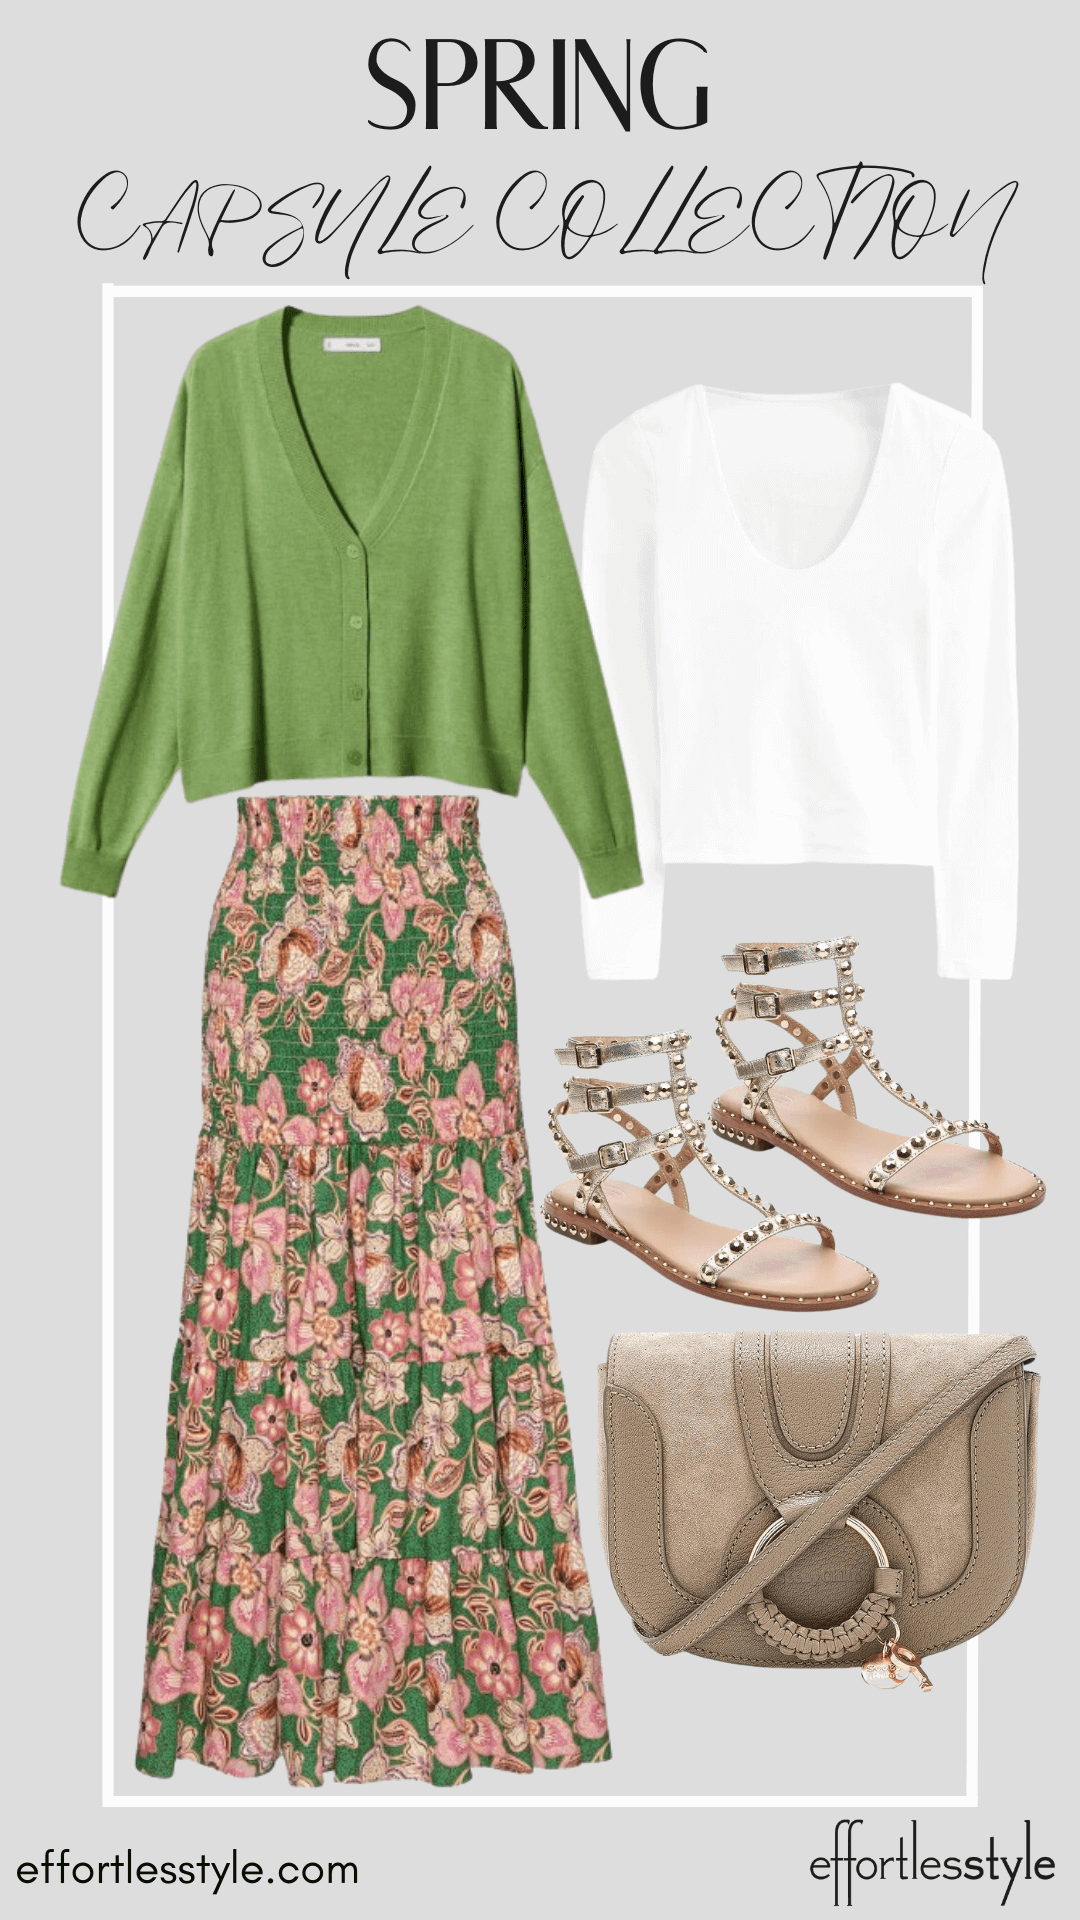 How To Wear Our Spring Capsule Wardrobe - Part 1 Matching Set Skirt & Long Sleeve Tee & Cardigan how to style a long skirt how to wear a long skirt how to wear a cardigan with a skirt must have sandals for spring must have sandals for summer